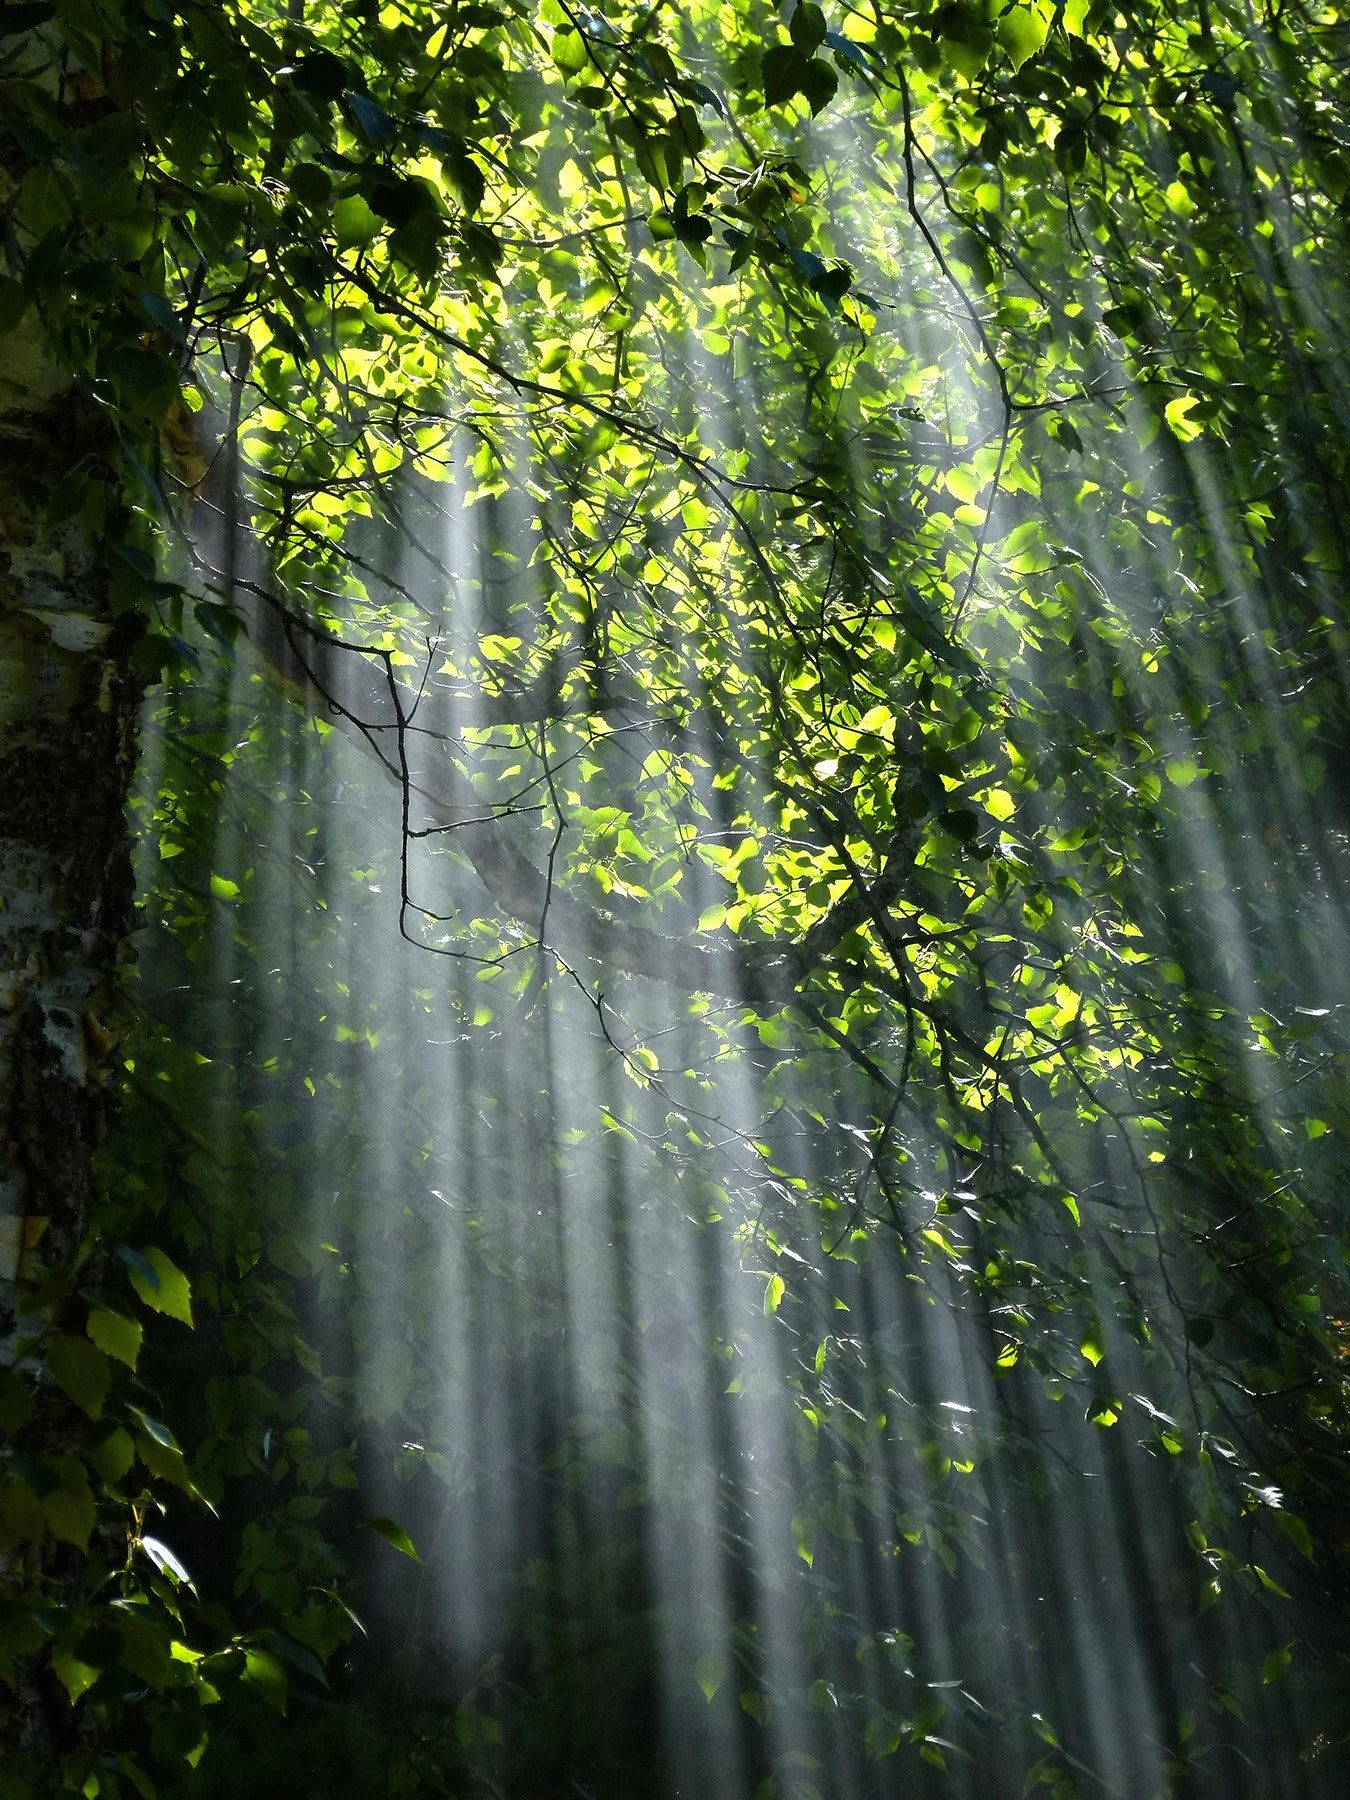 Sunlight shining through the trees in the forest - Sunlight, sunshine